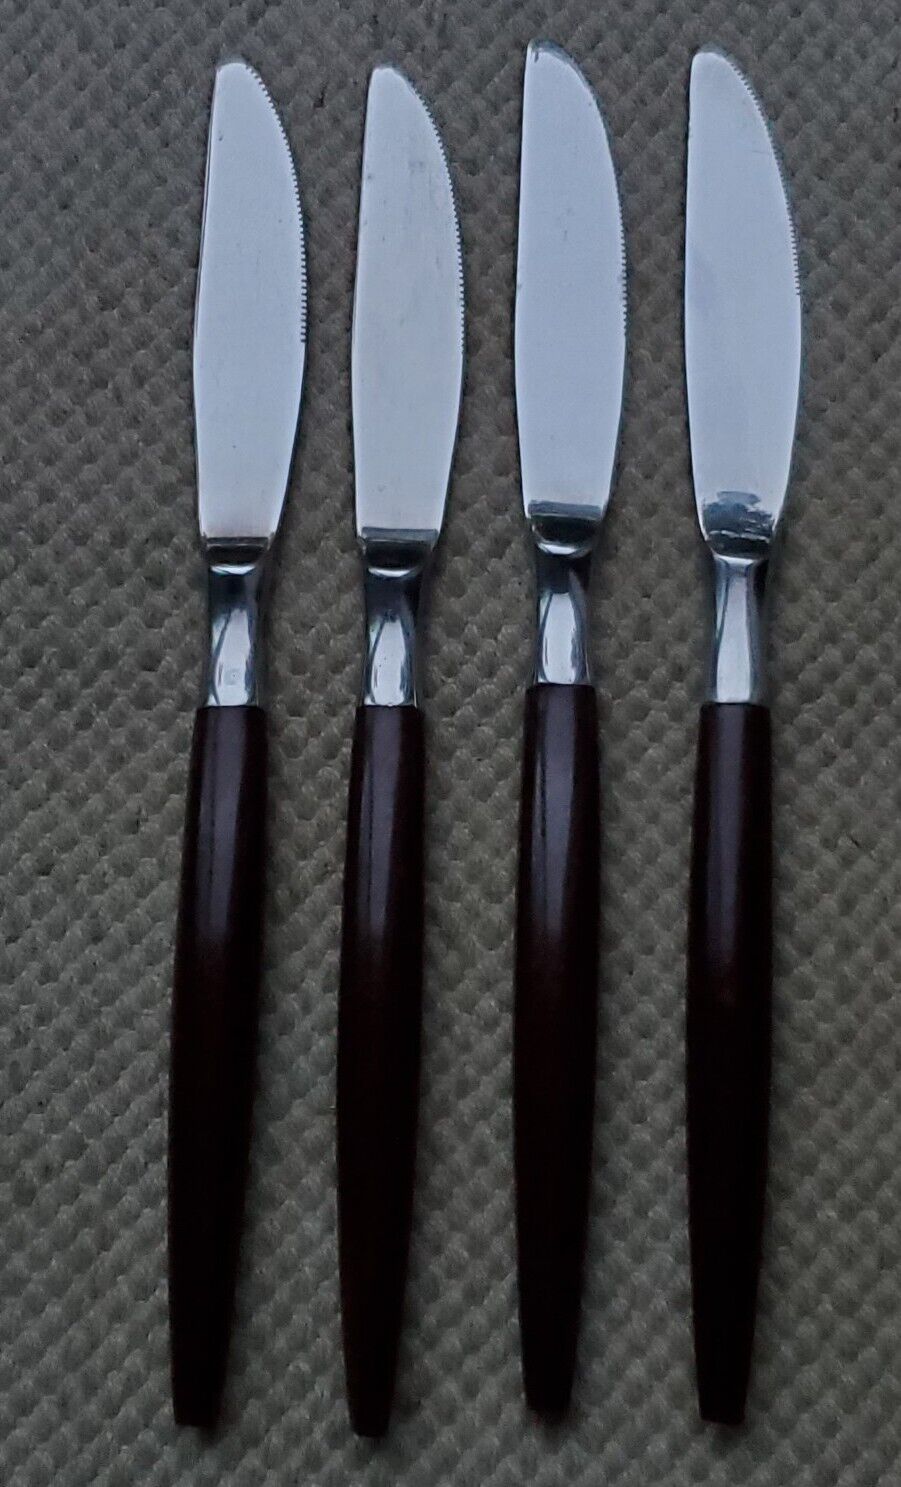 4 AMERICAN TEMPO Stainless Canoe Muffin Wood Flatware Dinner Butter Knife Knives